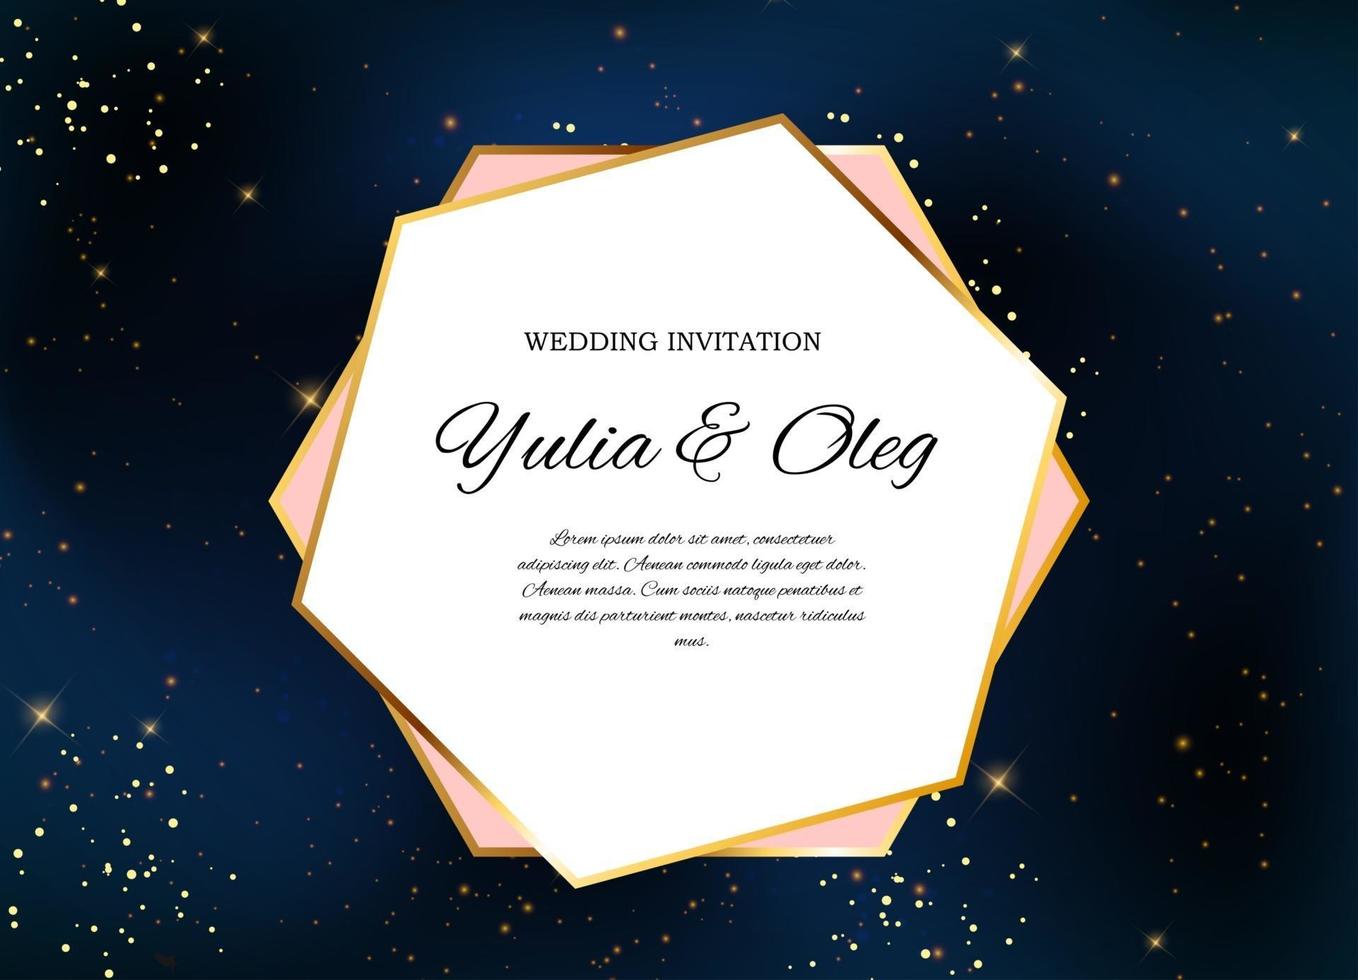 Wedding Invitation with Night Sky and Stars Background. Vector Illustration